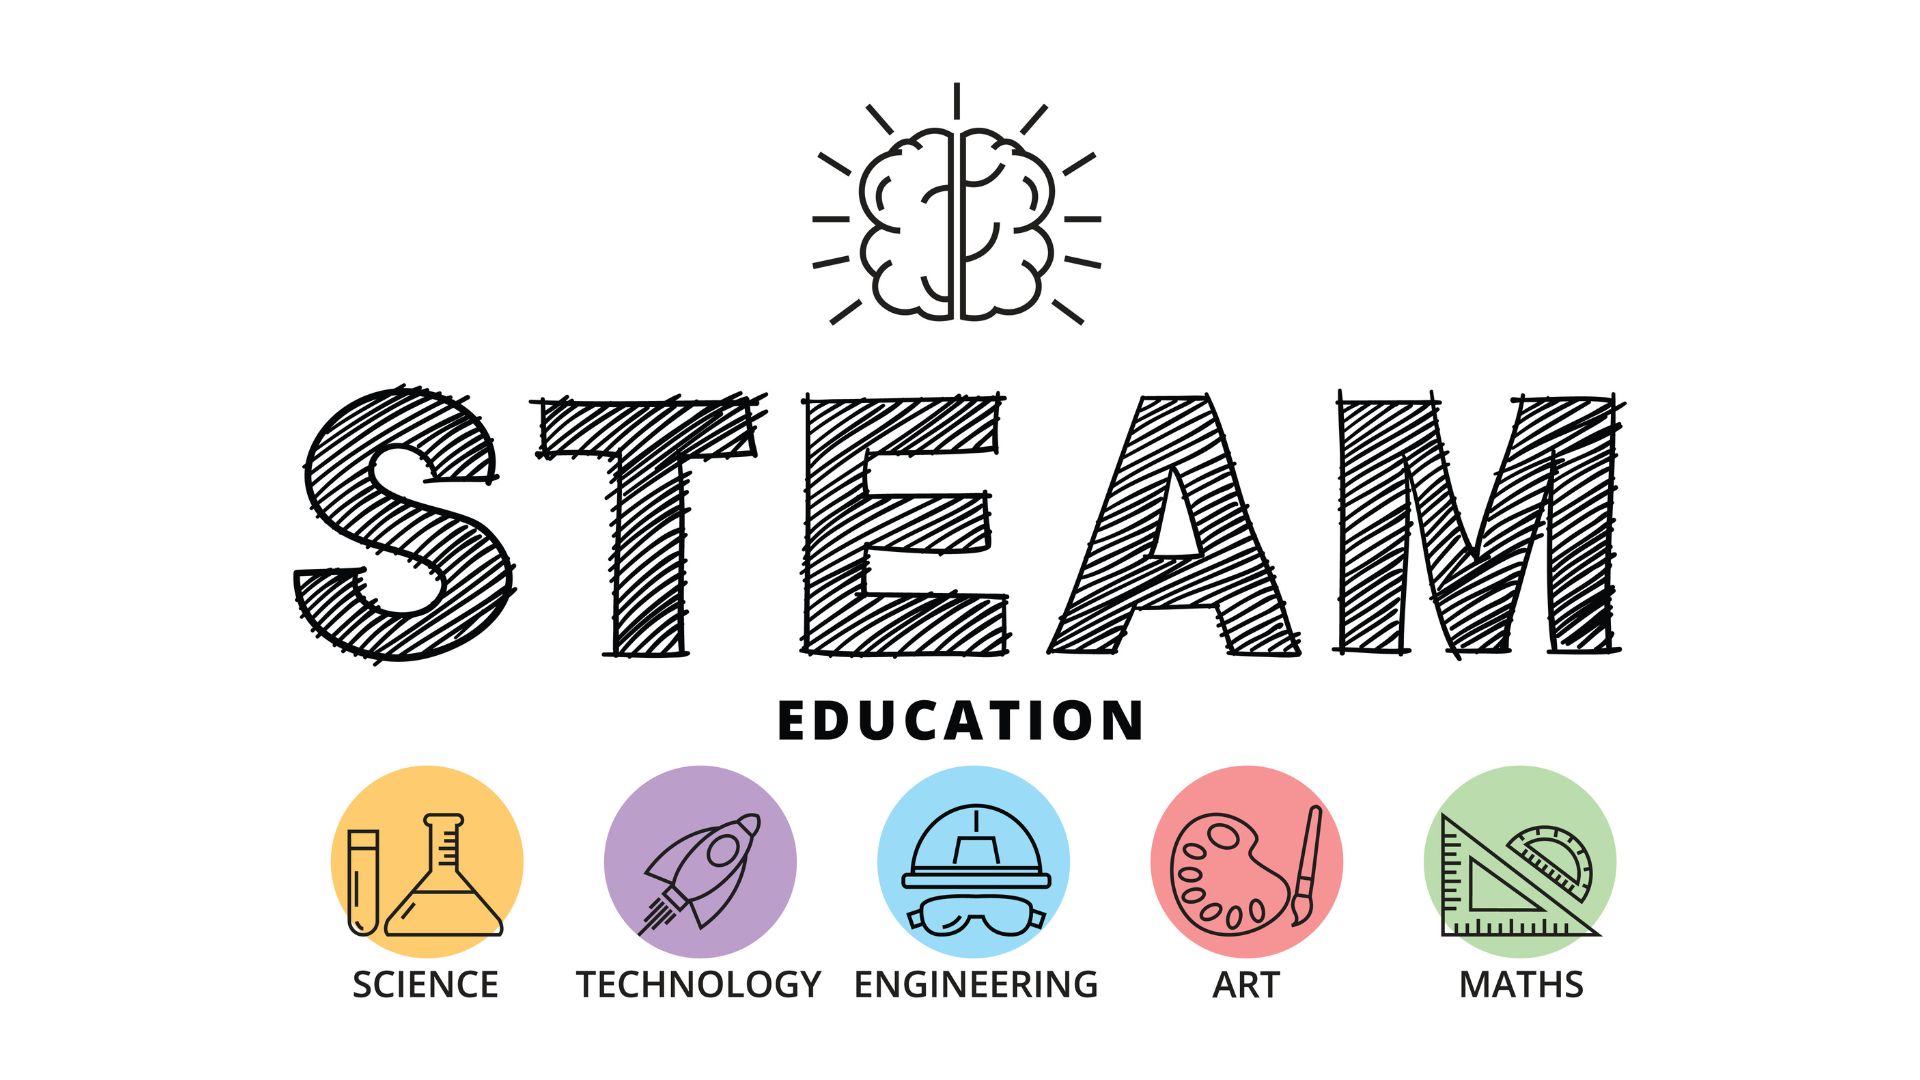 4 Benefits of STEAM Education Why it's Essential for Today's Students